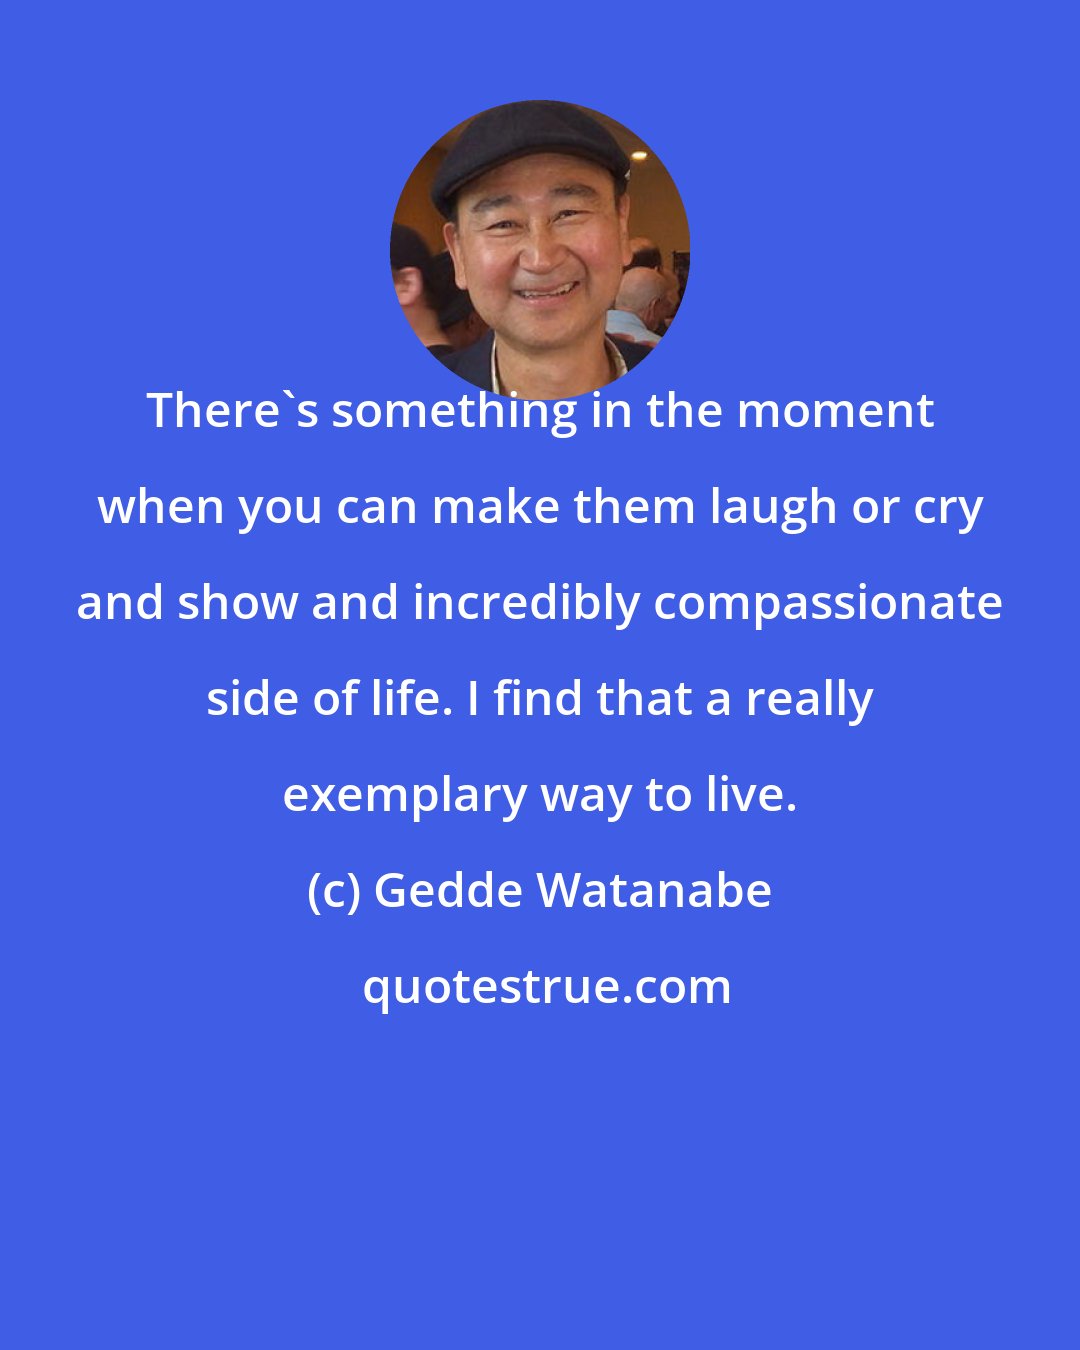 Gedde Watanabe: There's something in the moment when you can make them laugh or cry and show and incredibly compassionate side of life. I find that a really exemplary way to live.